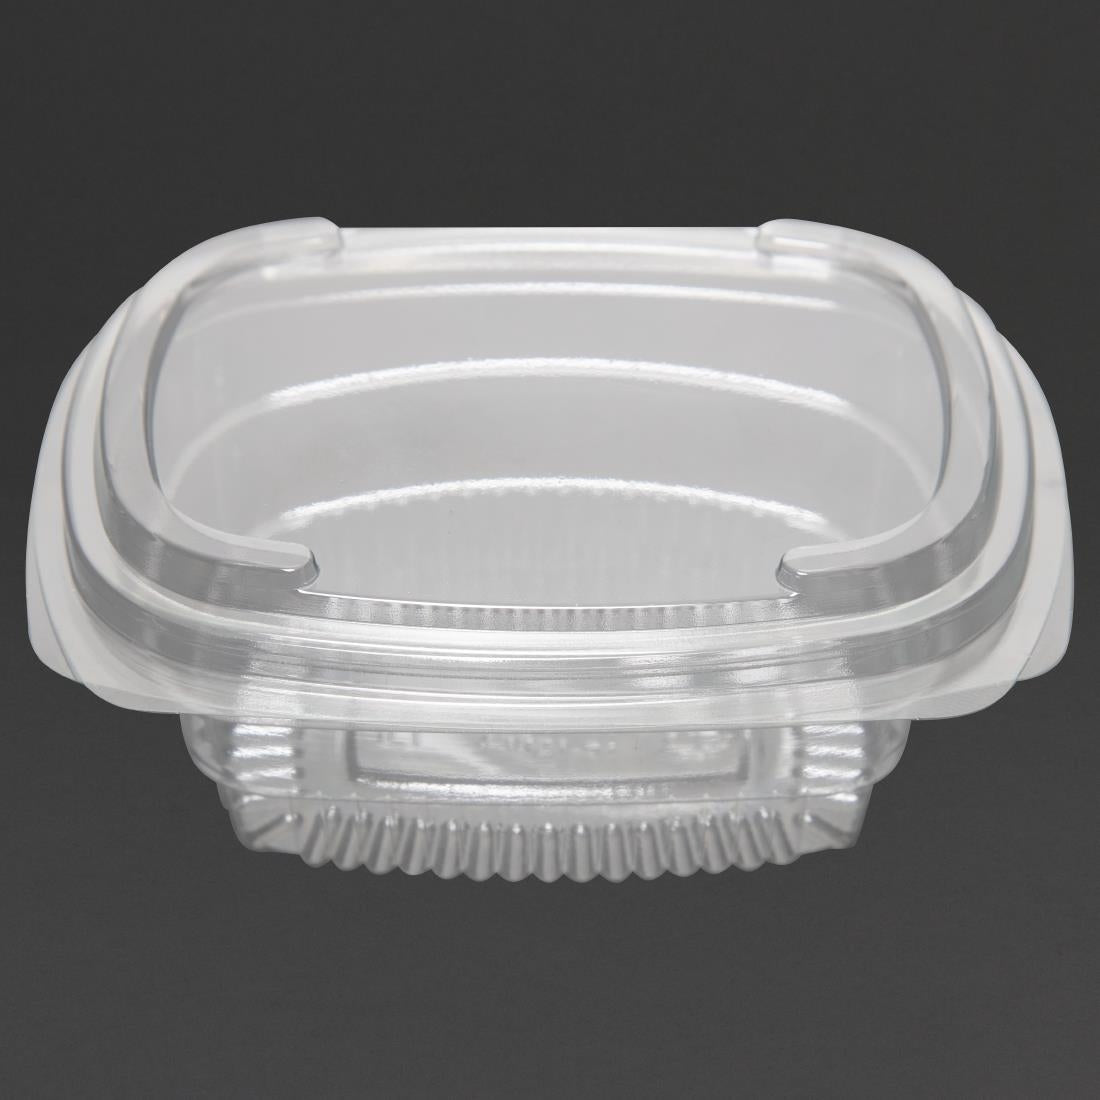 FB354 Faerch Fresco Recyclable Deli Containers With Lid 250ml / 9oz (Pack of 600) JD Catering Equipment Solutions Ltd